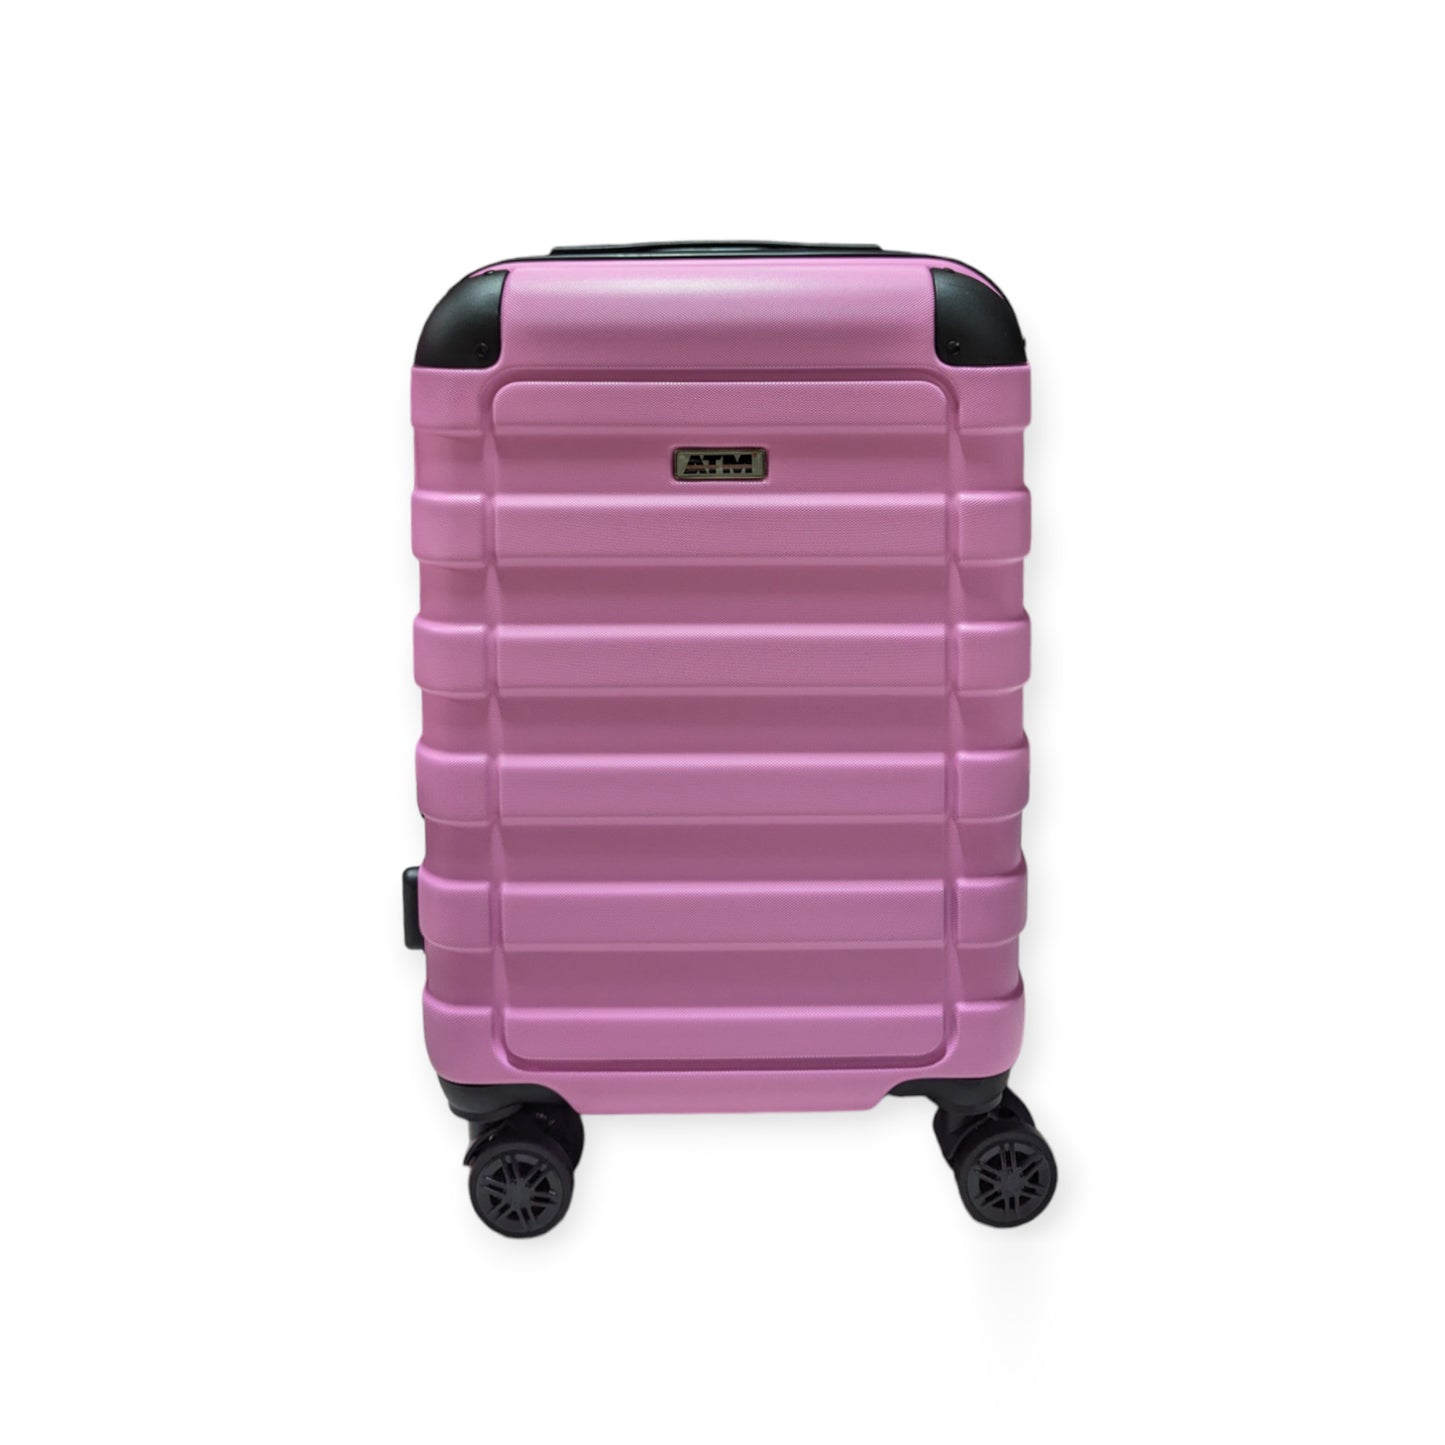 Classic Collection Pink Luggage 3 Piece Set (20/26/30") Suitcase Lock Spinner